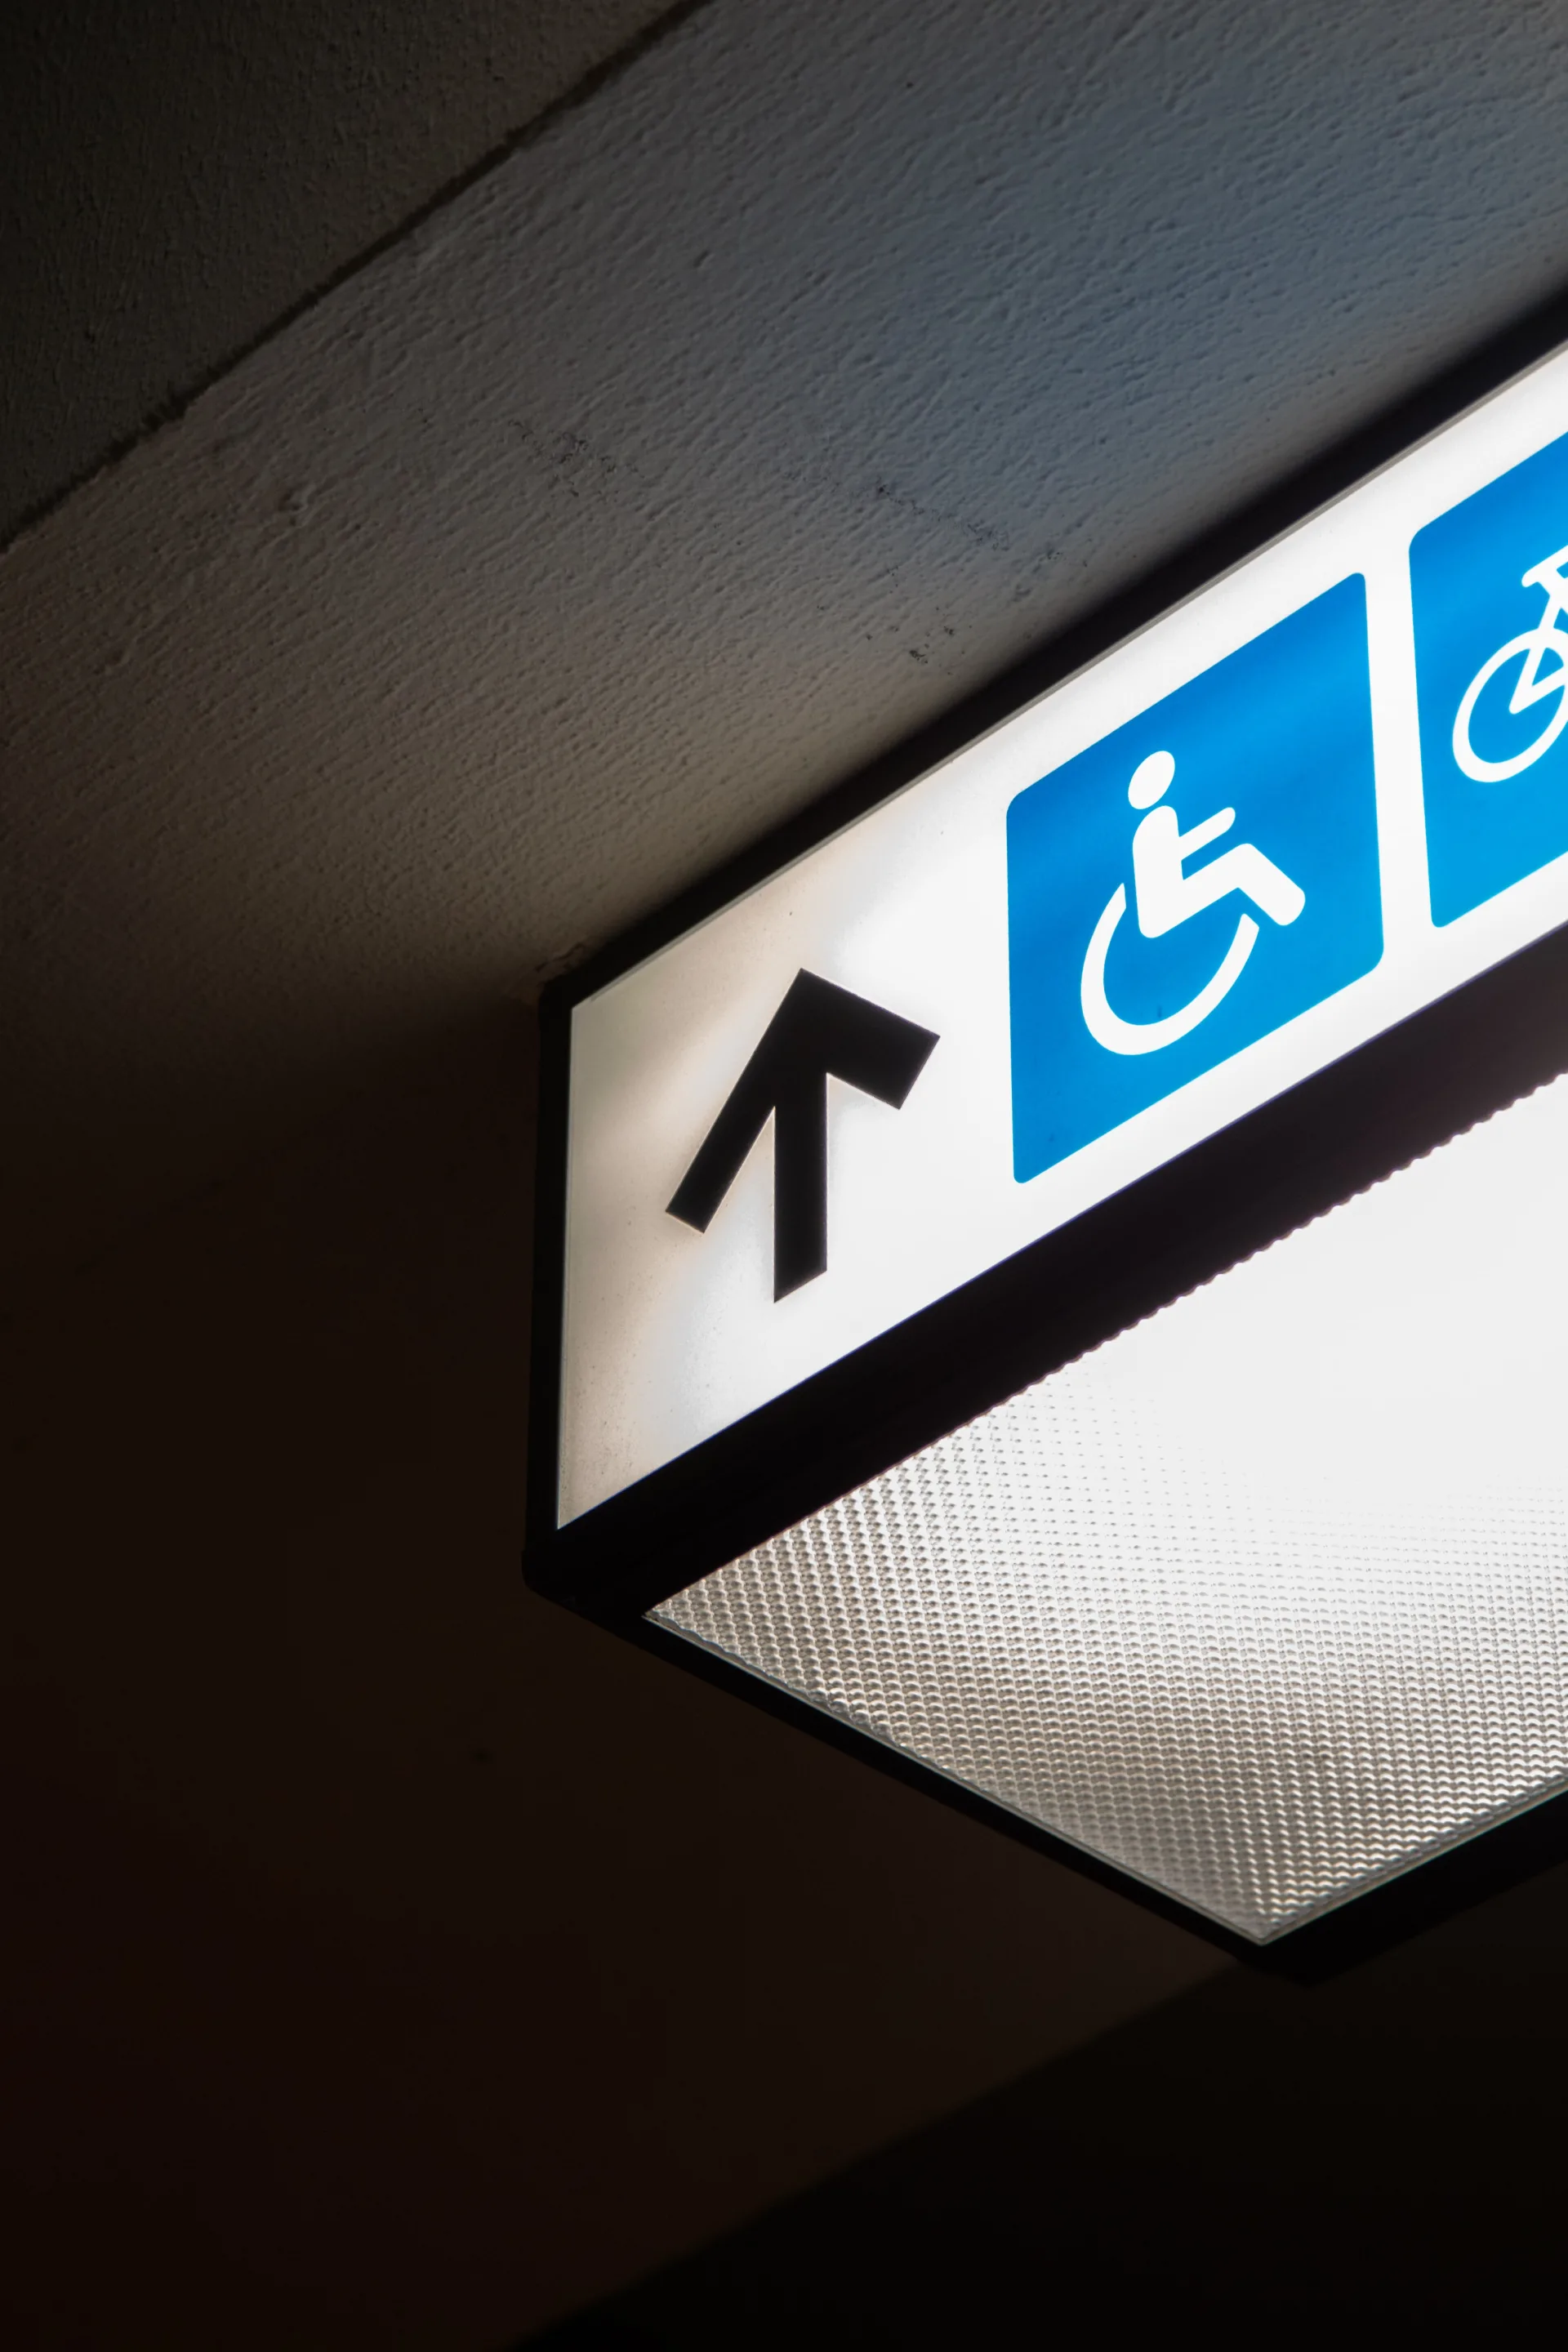 Sign in the ceiling with the symbol for wheelchair